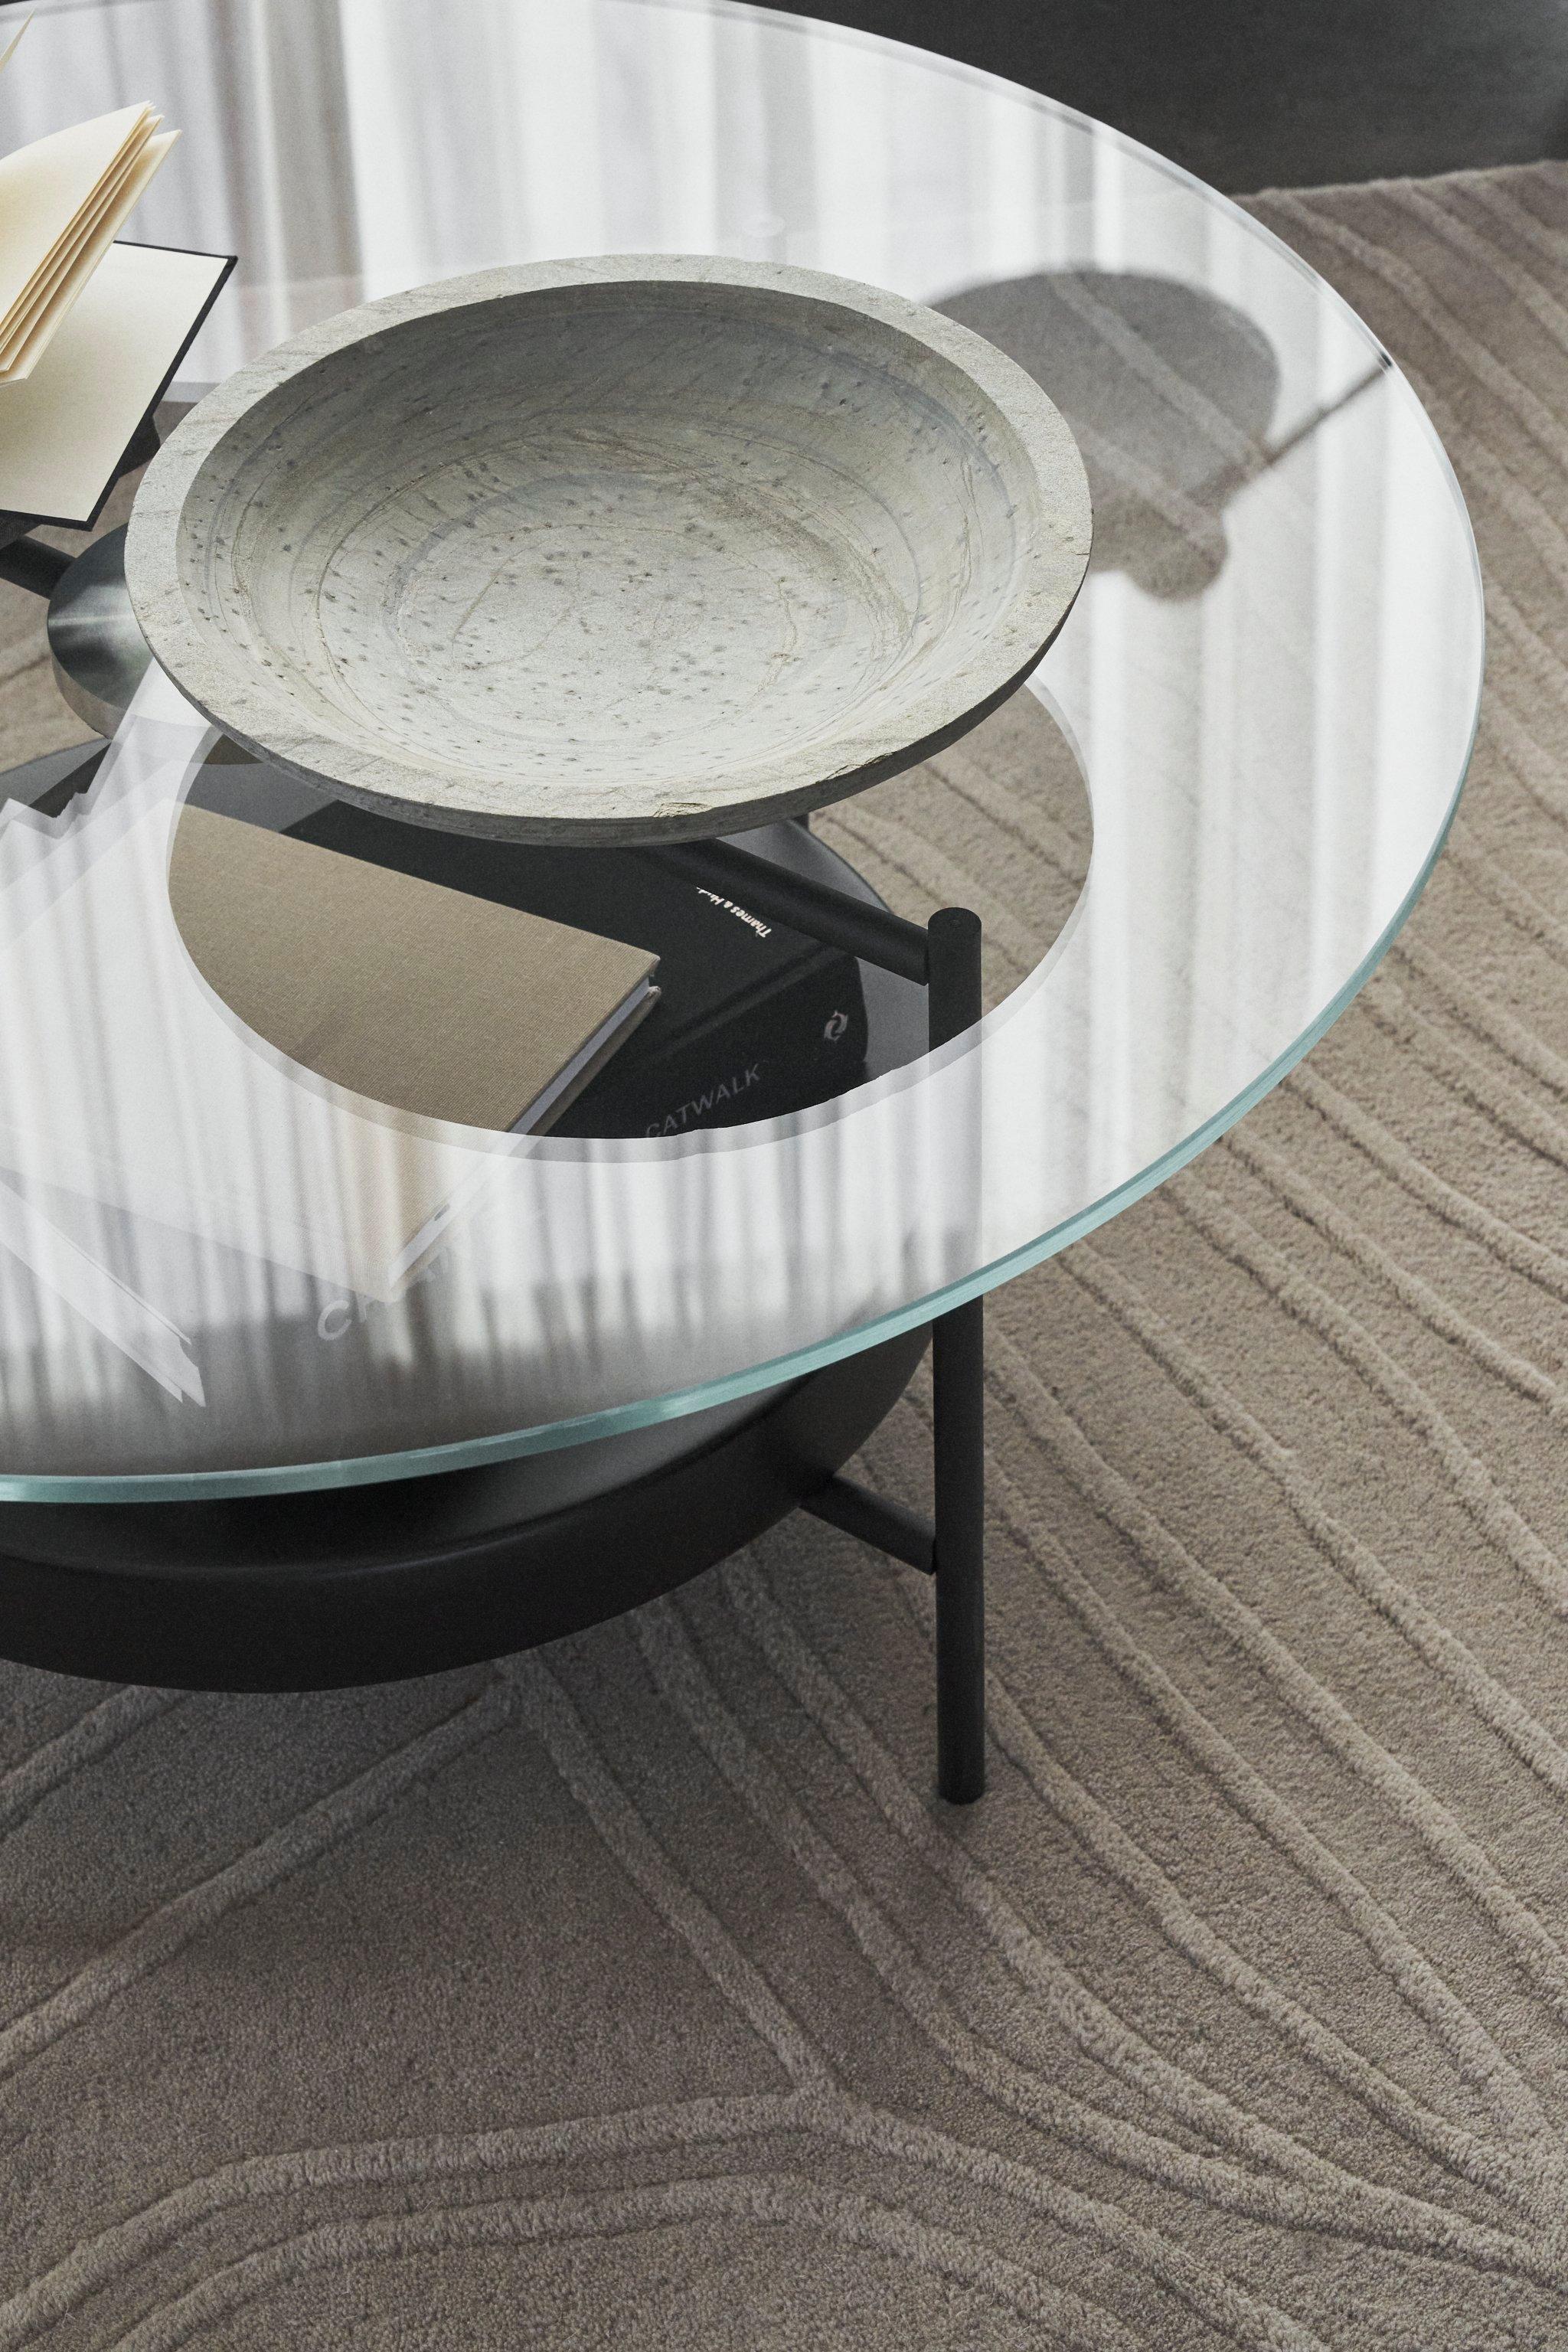 Modern glass-top coffee table with a decorative bowl and books on a textured rug